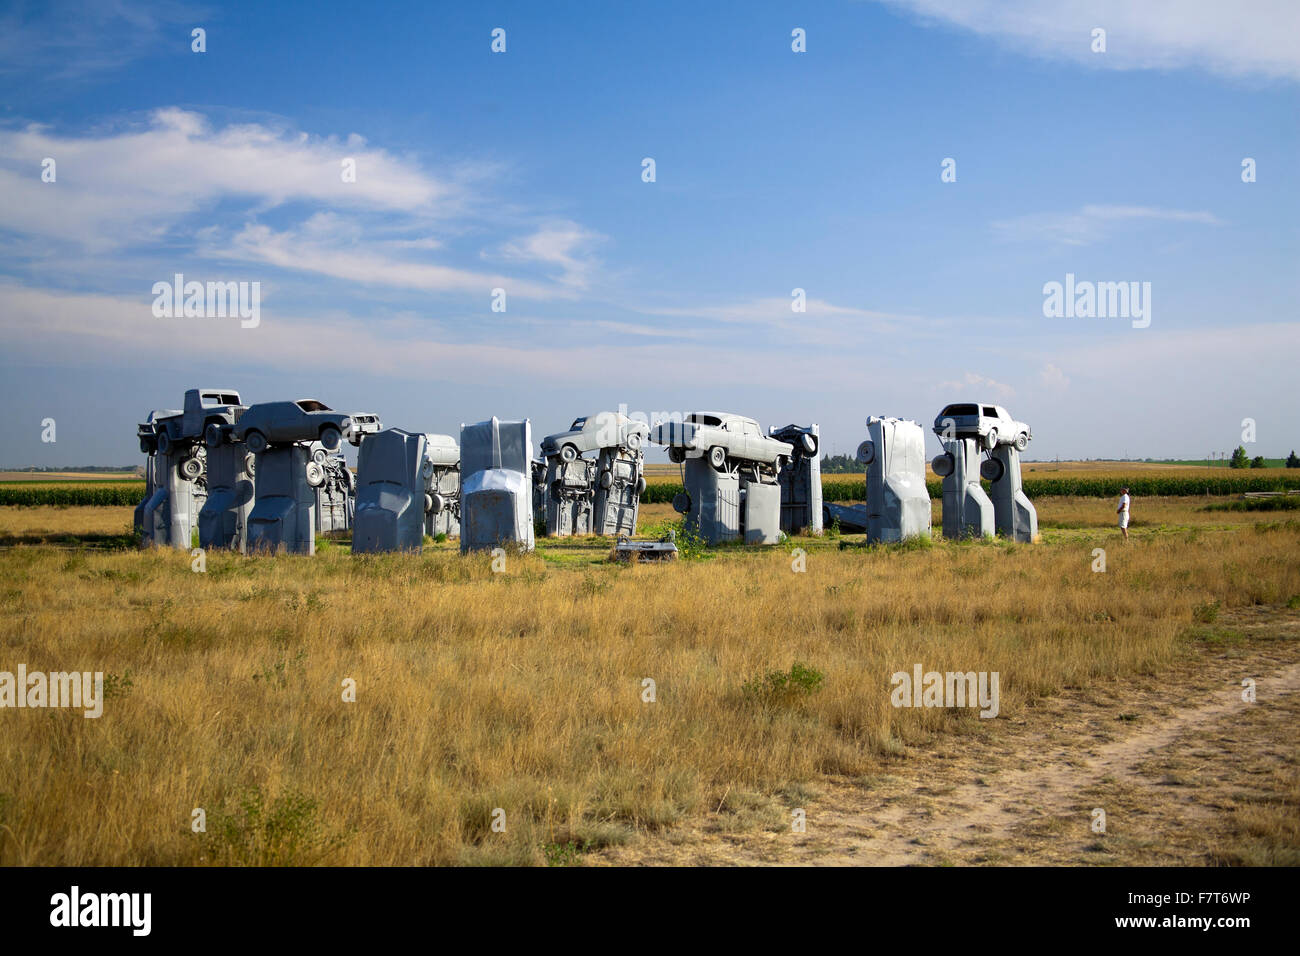 Nebraska - Carhenge, a re-creation of England's Stonehenge done with car bodies on a farm near the town of Alliance Stock Photo